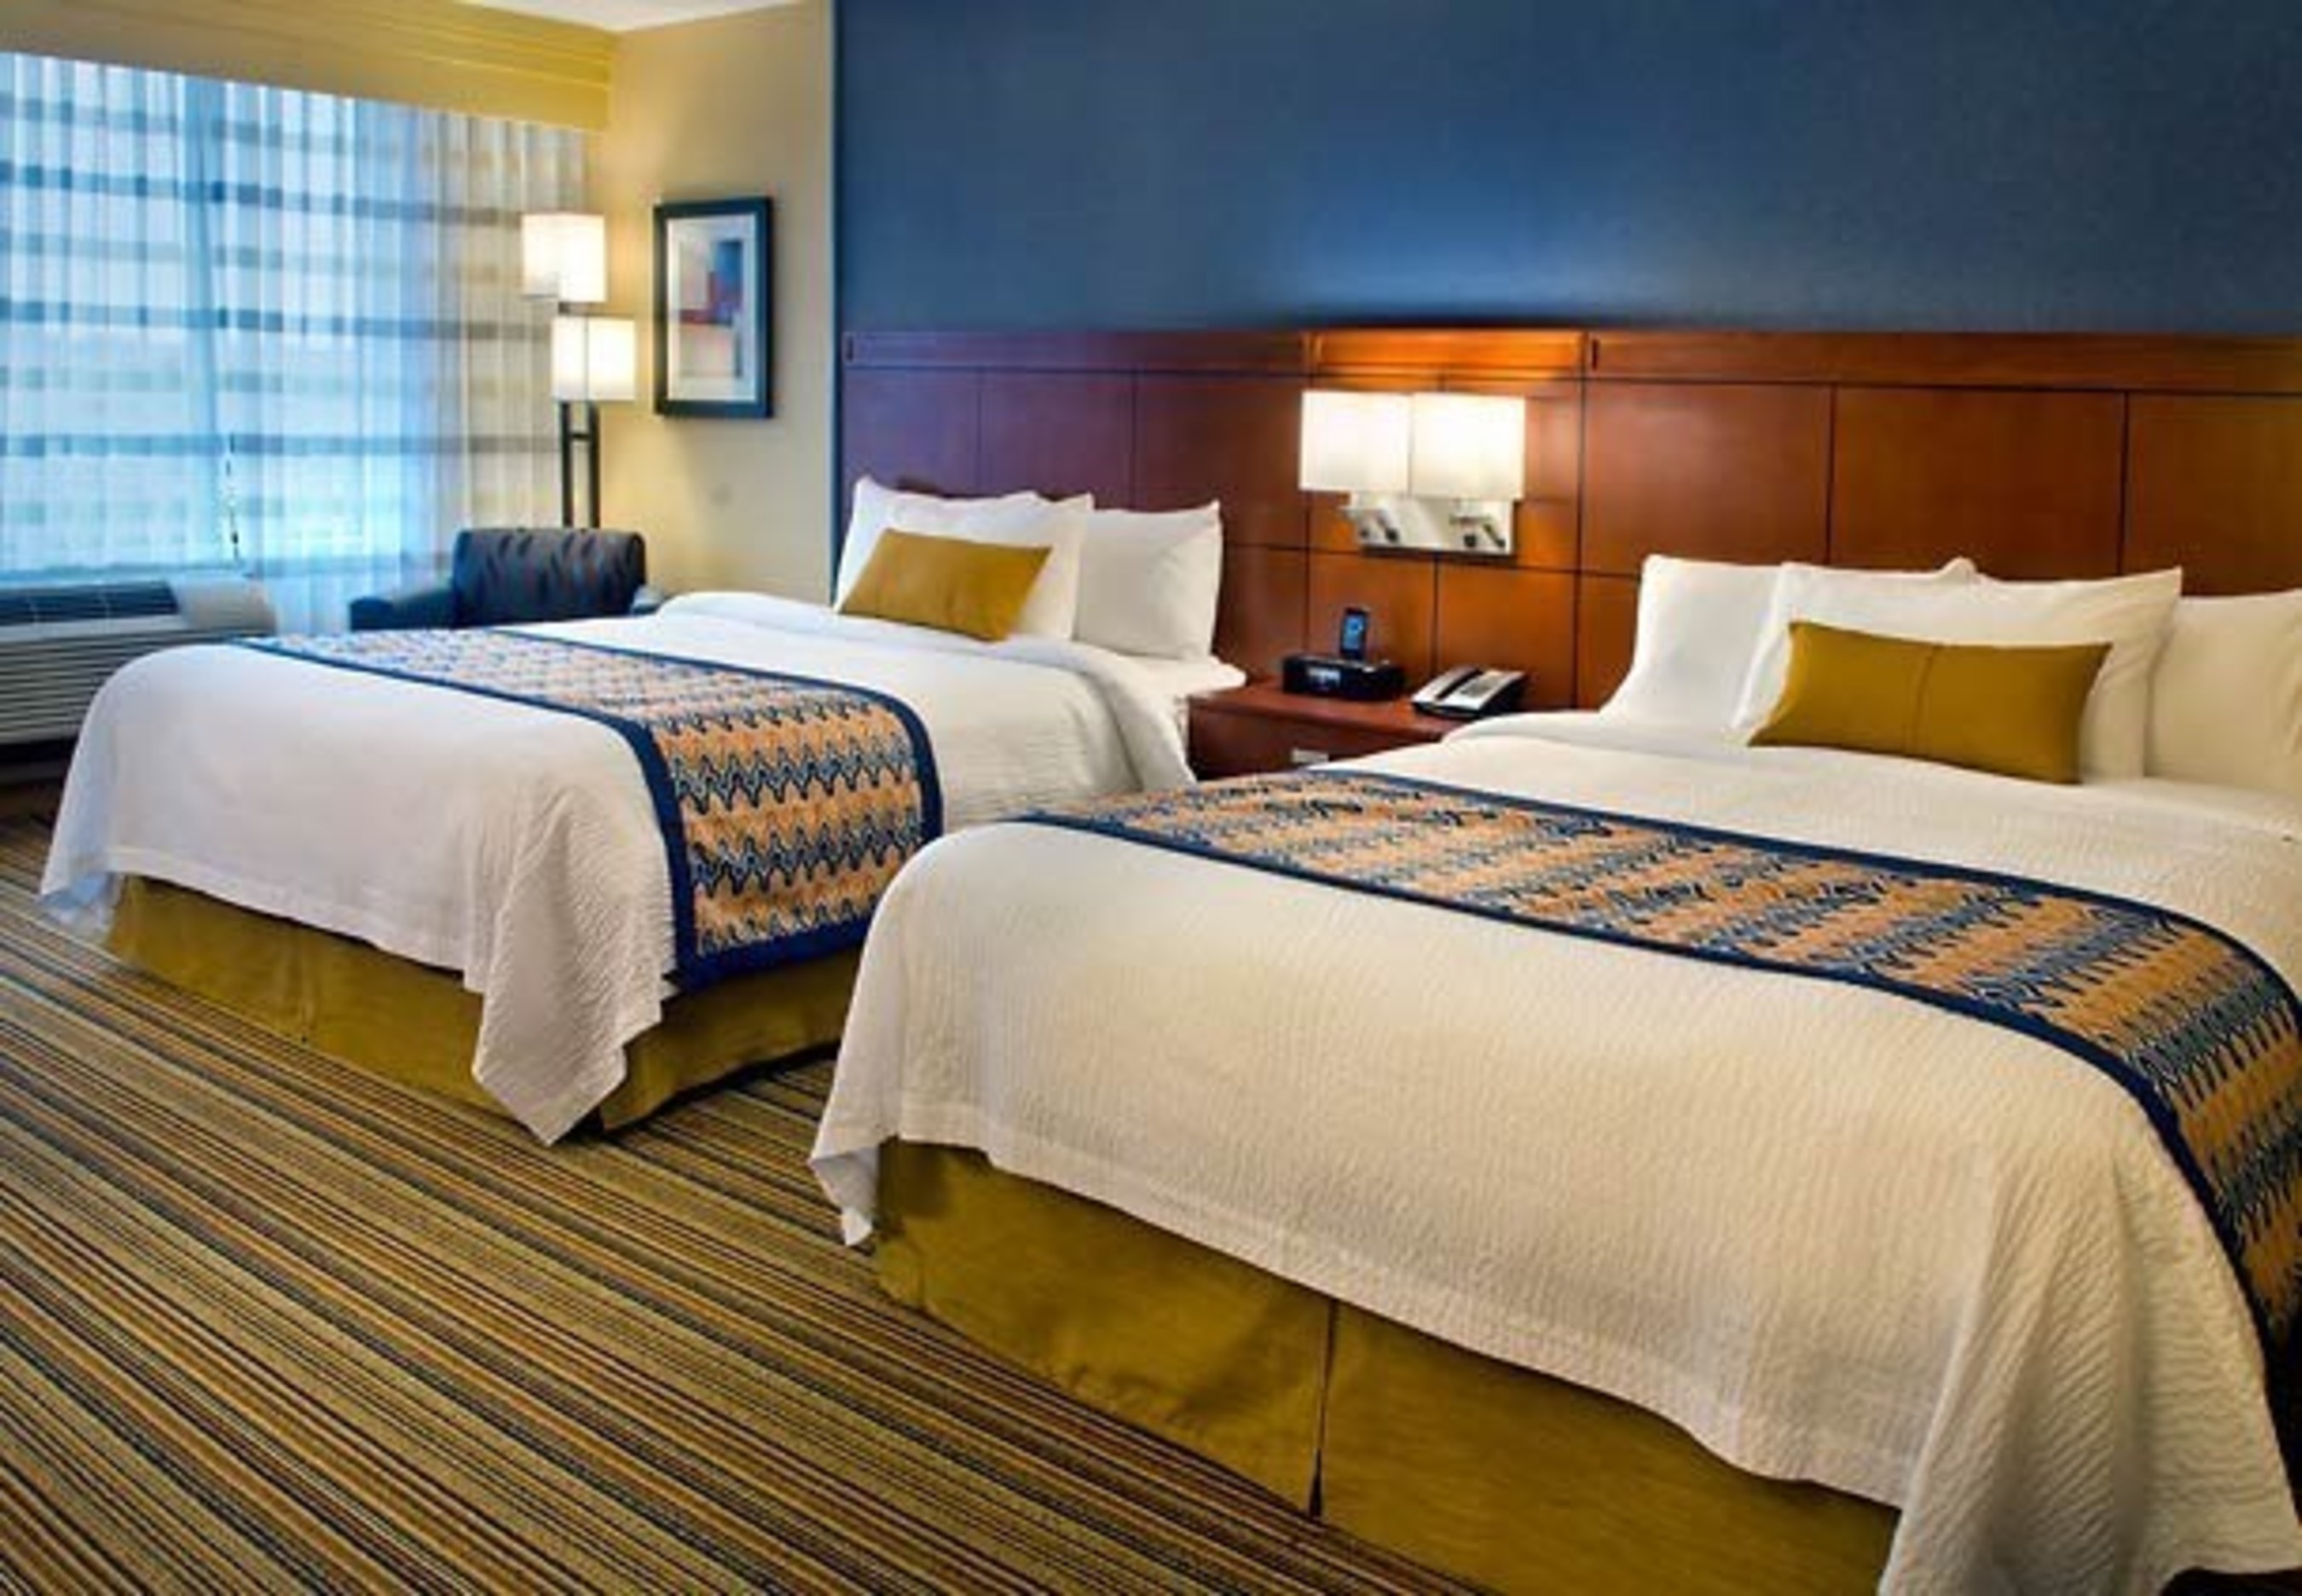 Guest rooms at the Courtyard Newark Downtown feature contemporary decor, plush bedding and free high-speed wireless Internet. The hotel also offers an on-site restaurant, modern fitness center and over 4,000 square feet of flexible event space. In conjunction with a number of exciting events taking place in Newark this holiday season, the hotel has announced that its December room rates will start at just $129 per night. For information, visit www.marriott.com/EWRDT or call 1-973-848-0070.